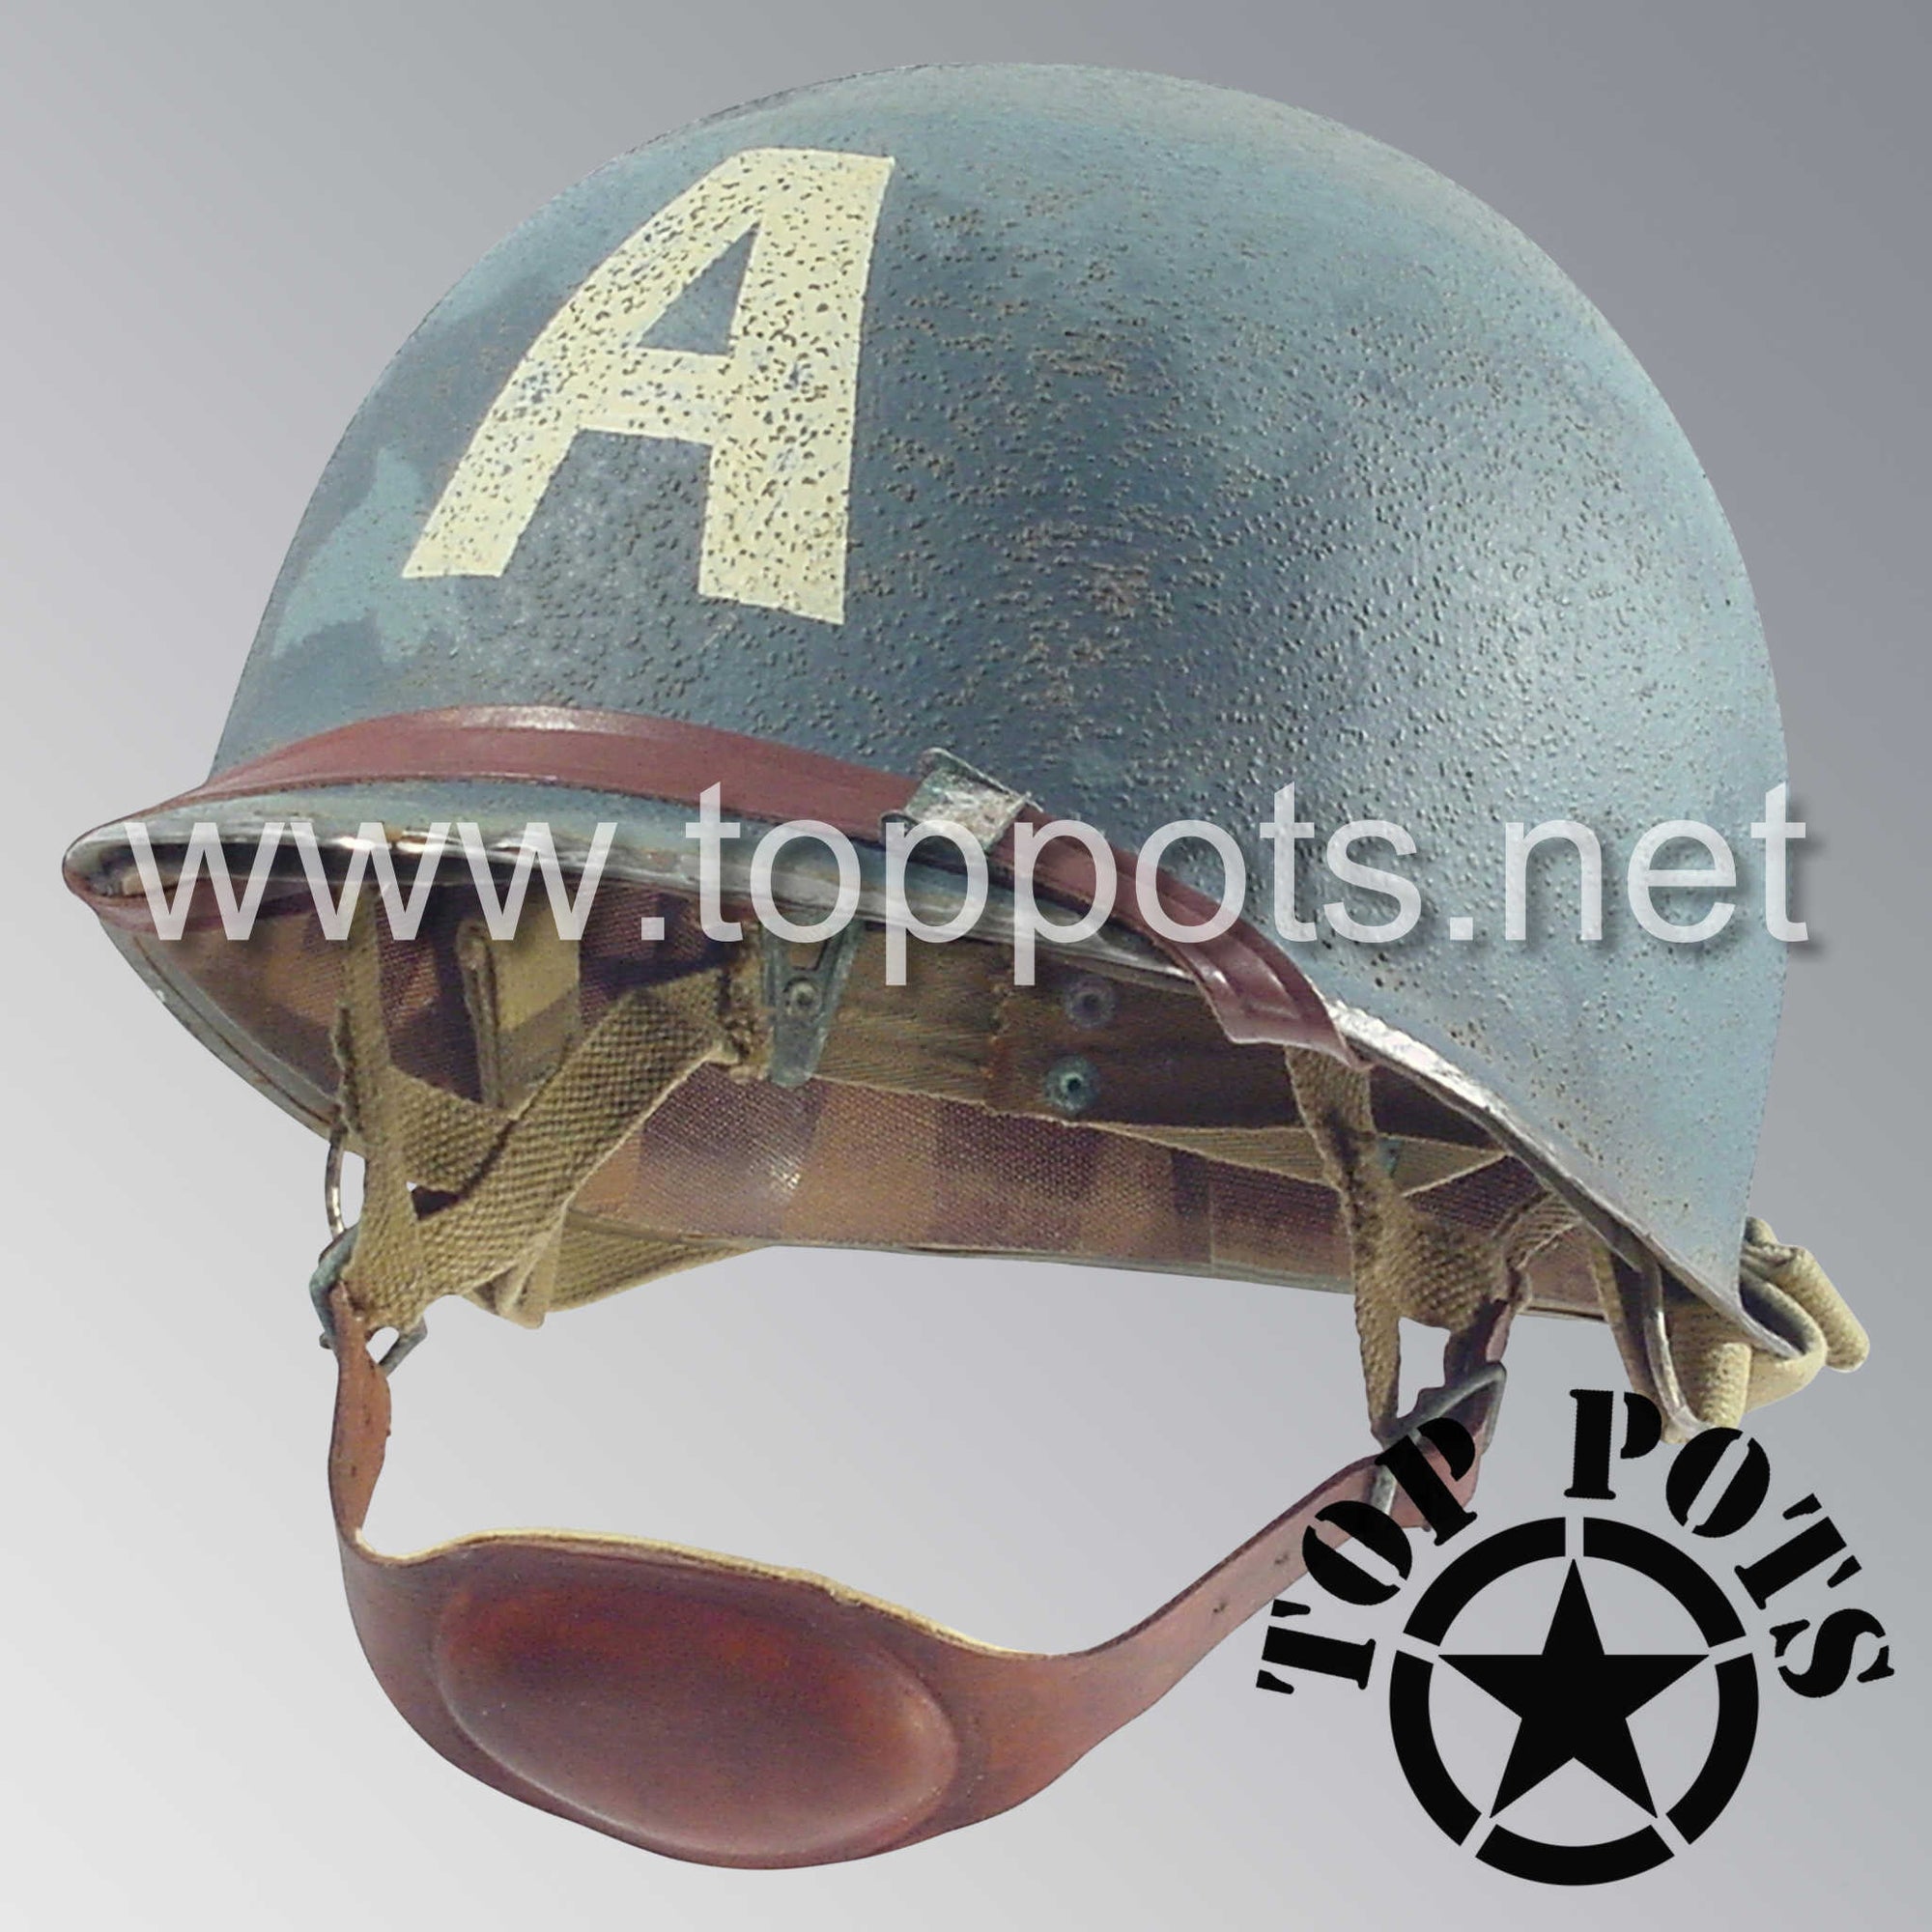 WWII US Army Aged Original M2 Paratrooper Airborne Helmet D Bale Shell and Liner with Captain America Emblem